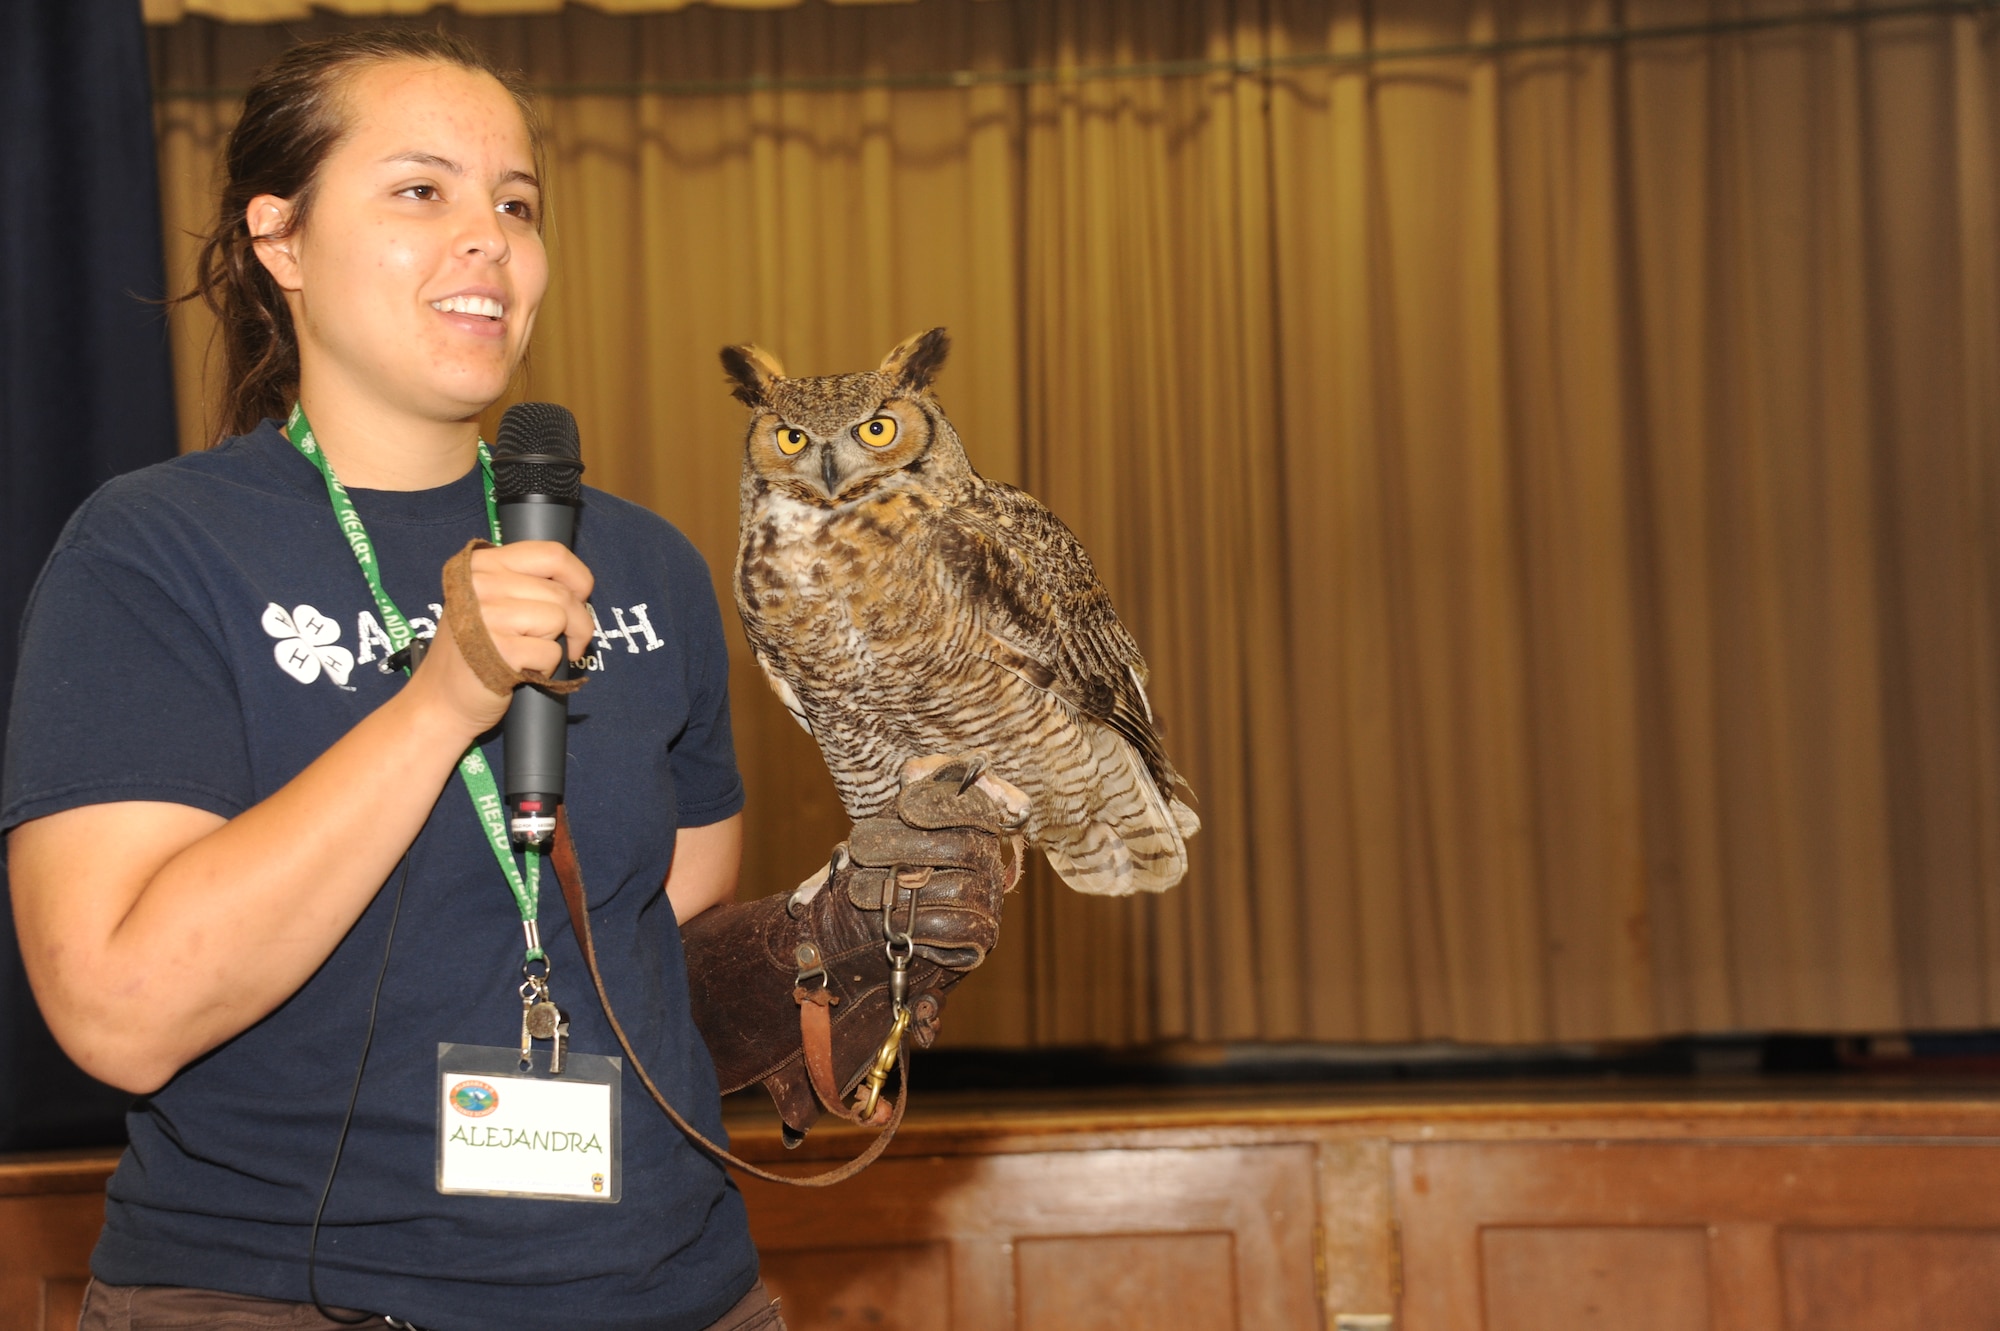 Alejandra Palacio, Alabama 4-H Science School environmental educational instructor, displays a Great Horned Owl to Maxwell Elementary and Middle School students during the Birds of Prey demonstration April 8, 2016, at Maxwell Air Force Base, Alabama. The Birds of Prey program strives to educate youth on the importance of protecting the environment and the animals within it. (U.S. Air Force photos by Airman 1st Class Alexa Culbert)